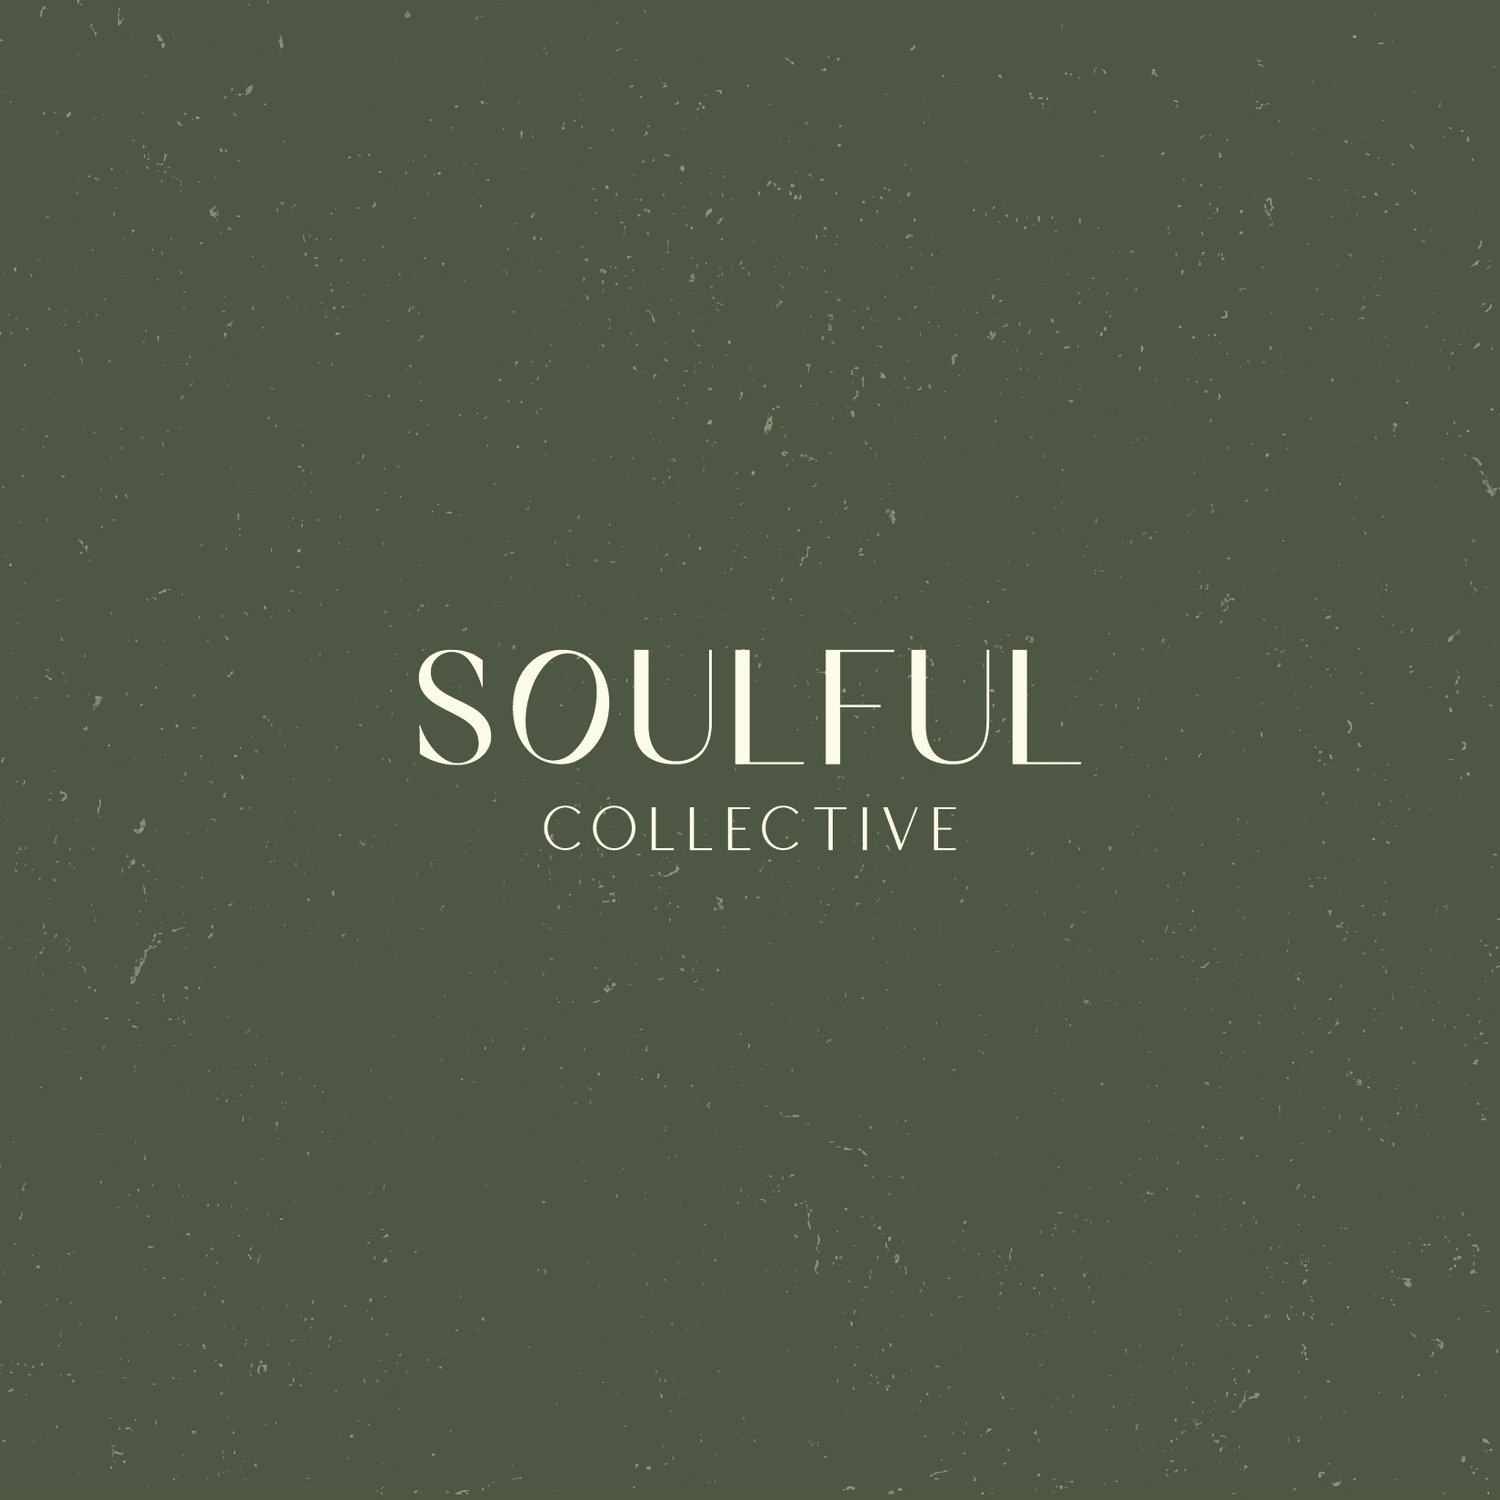 SOULFUL COLLECTIVE